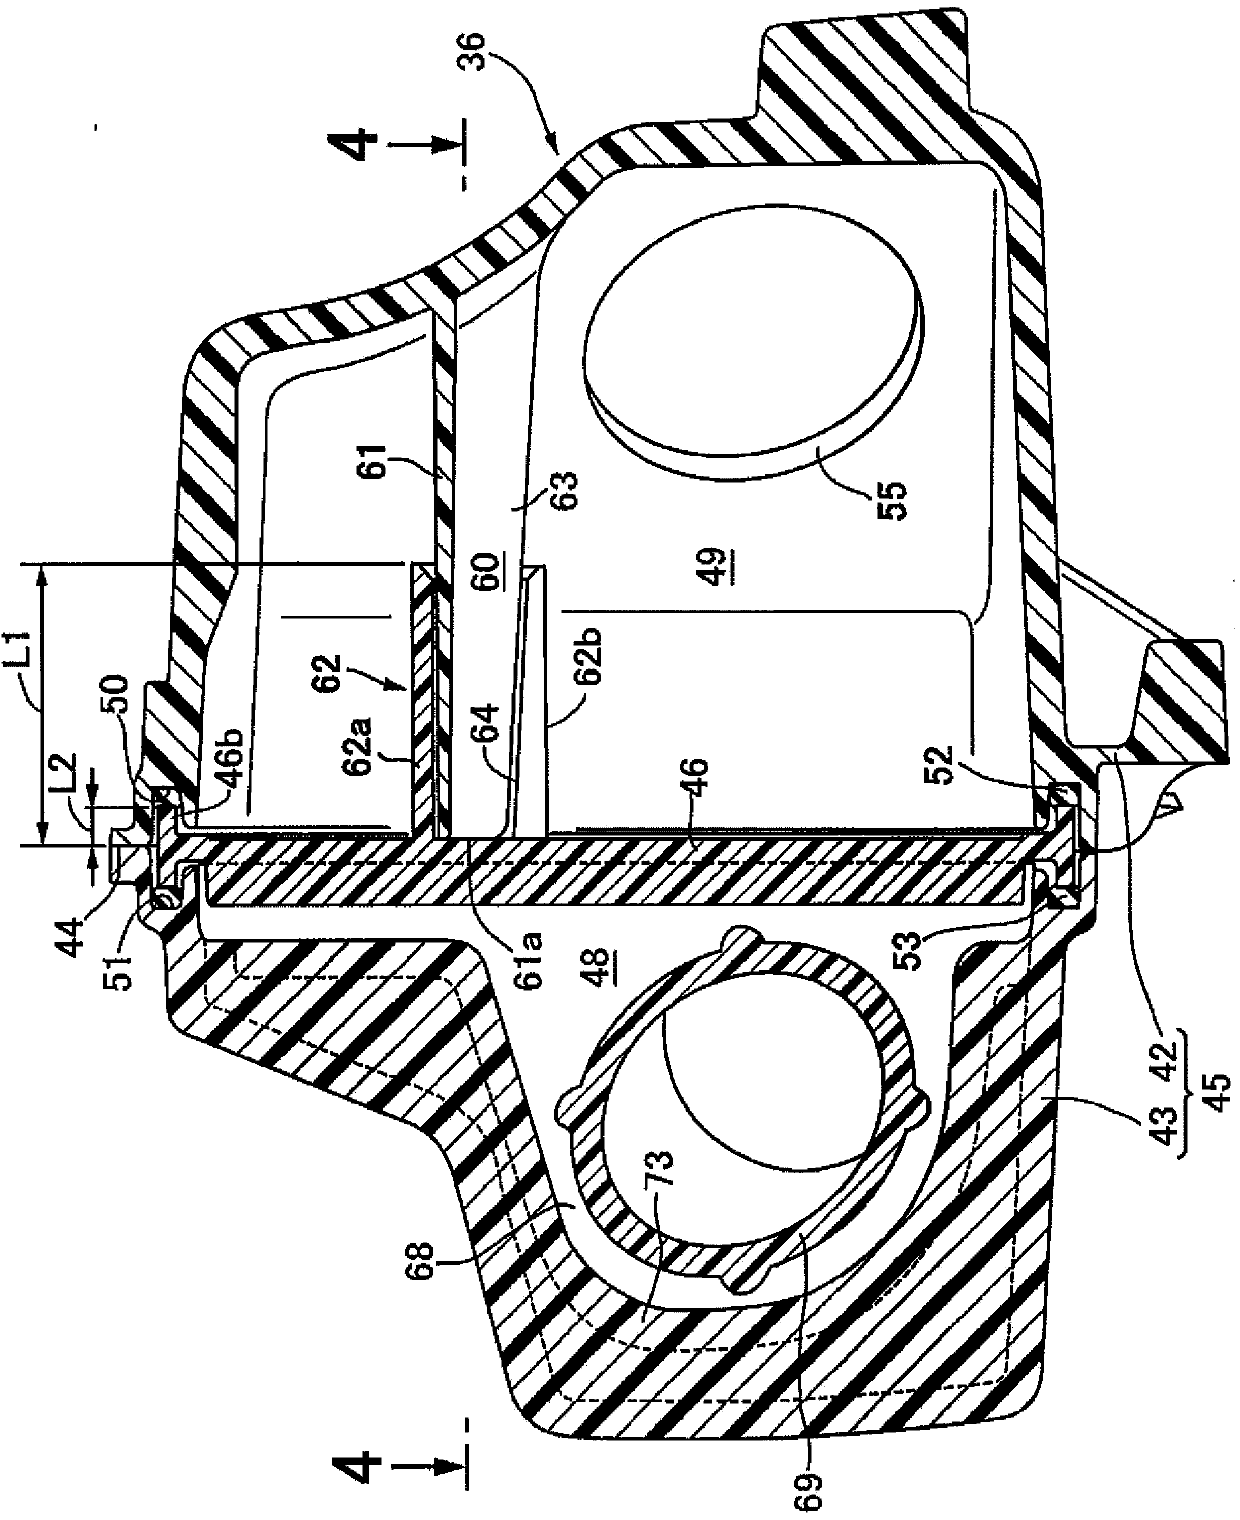 Air filter of internal combustion engine for saddle type vehicle